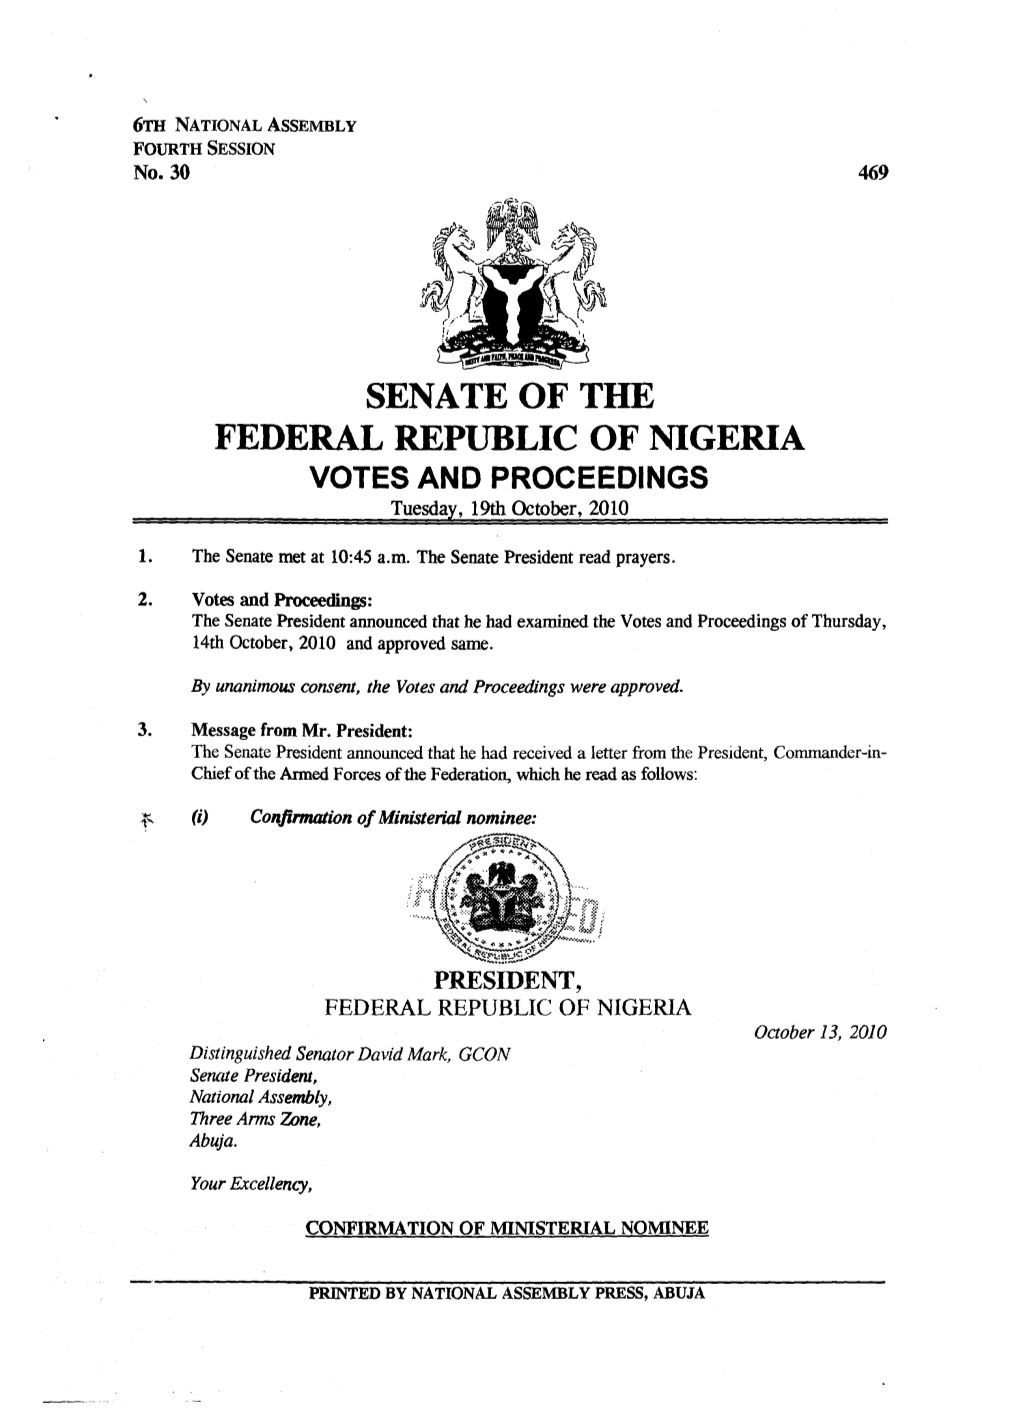 SENATE of the FEDERAL REPUBLIC of NIGERIA VOTES and PROCEEDINGS Tuesday, 19Th October, 2010